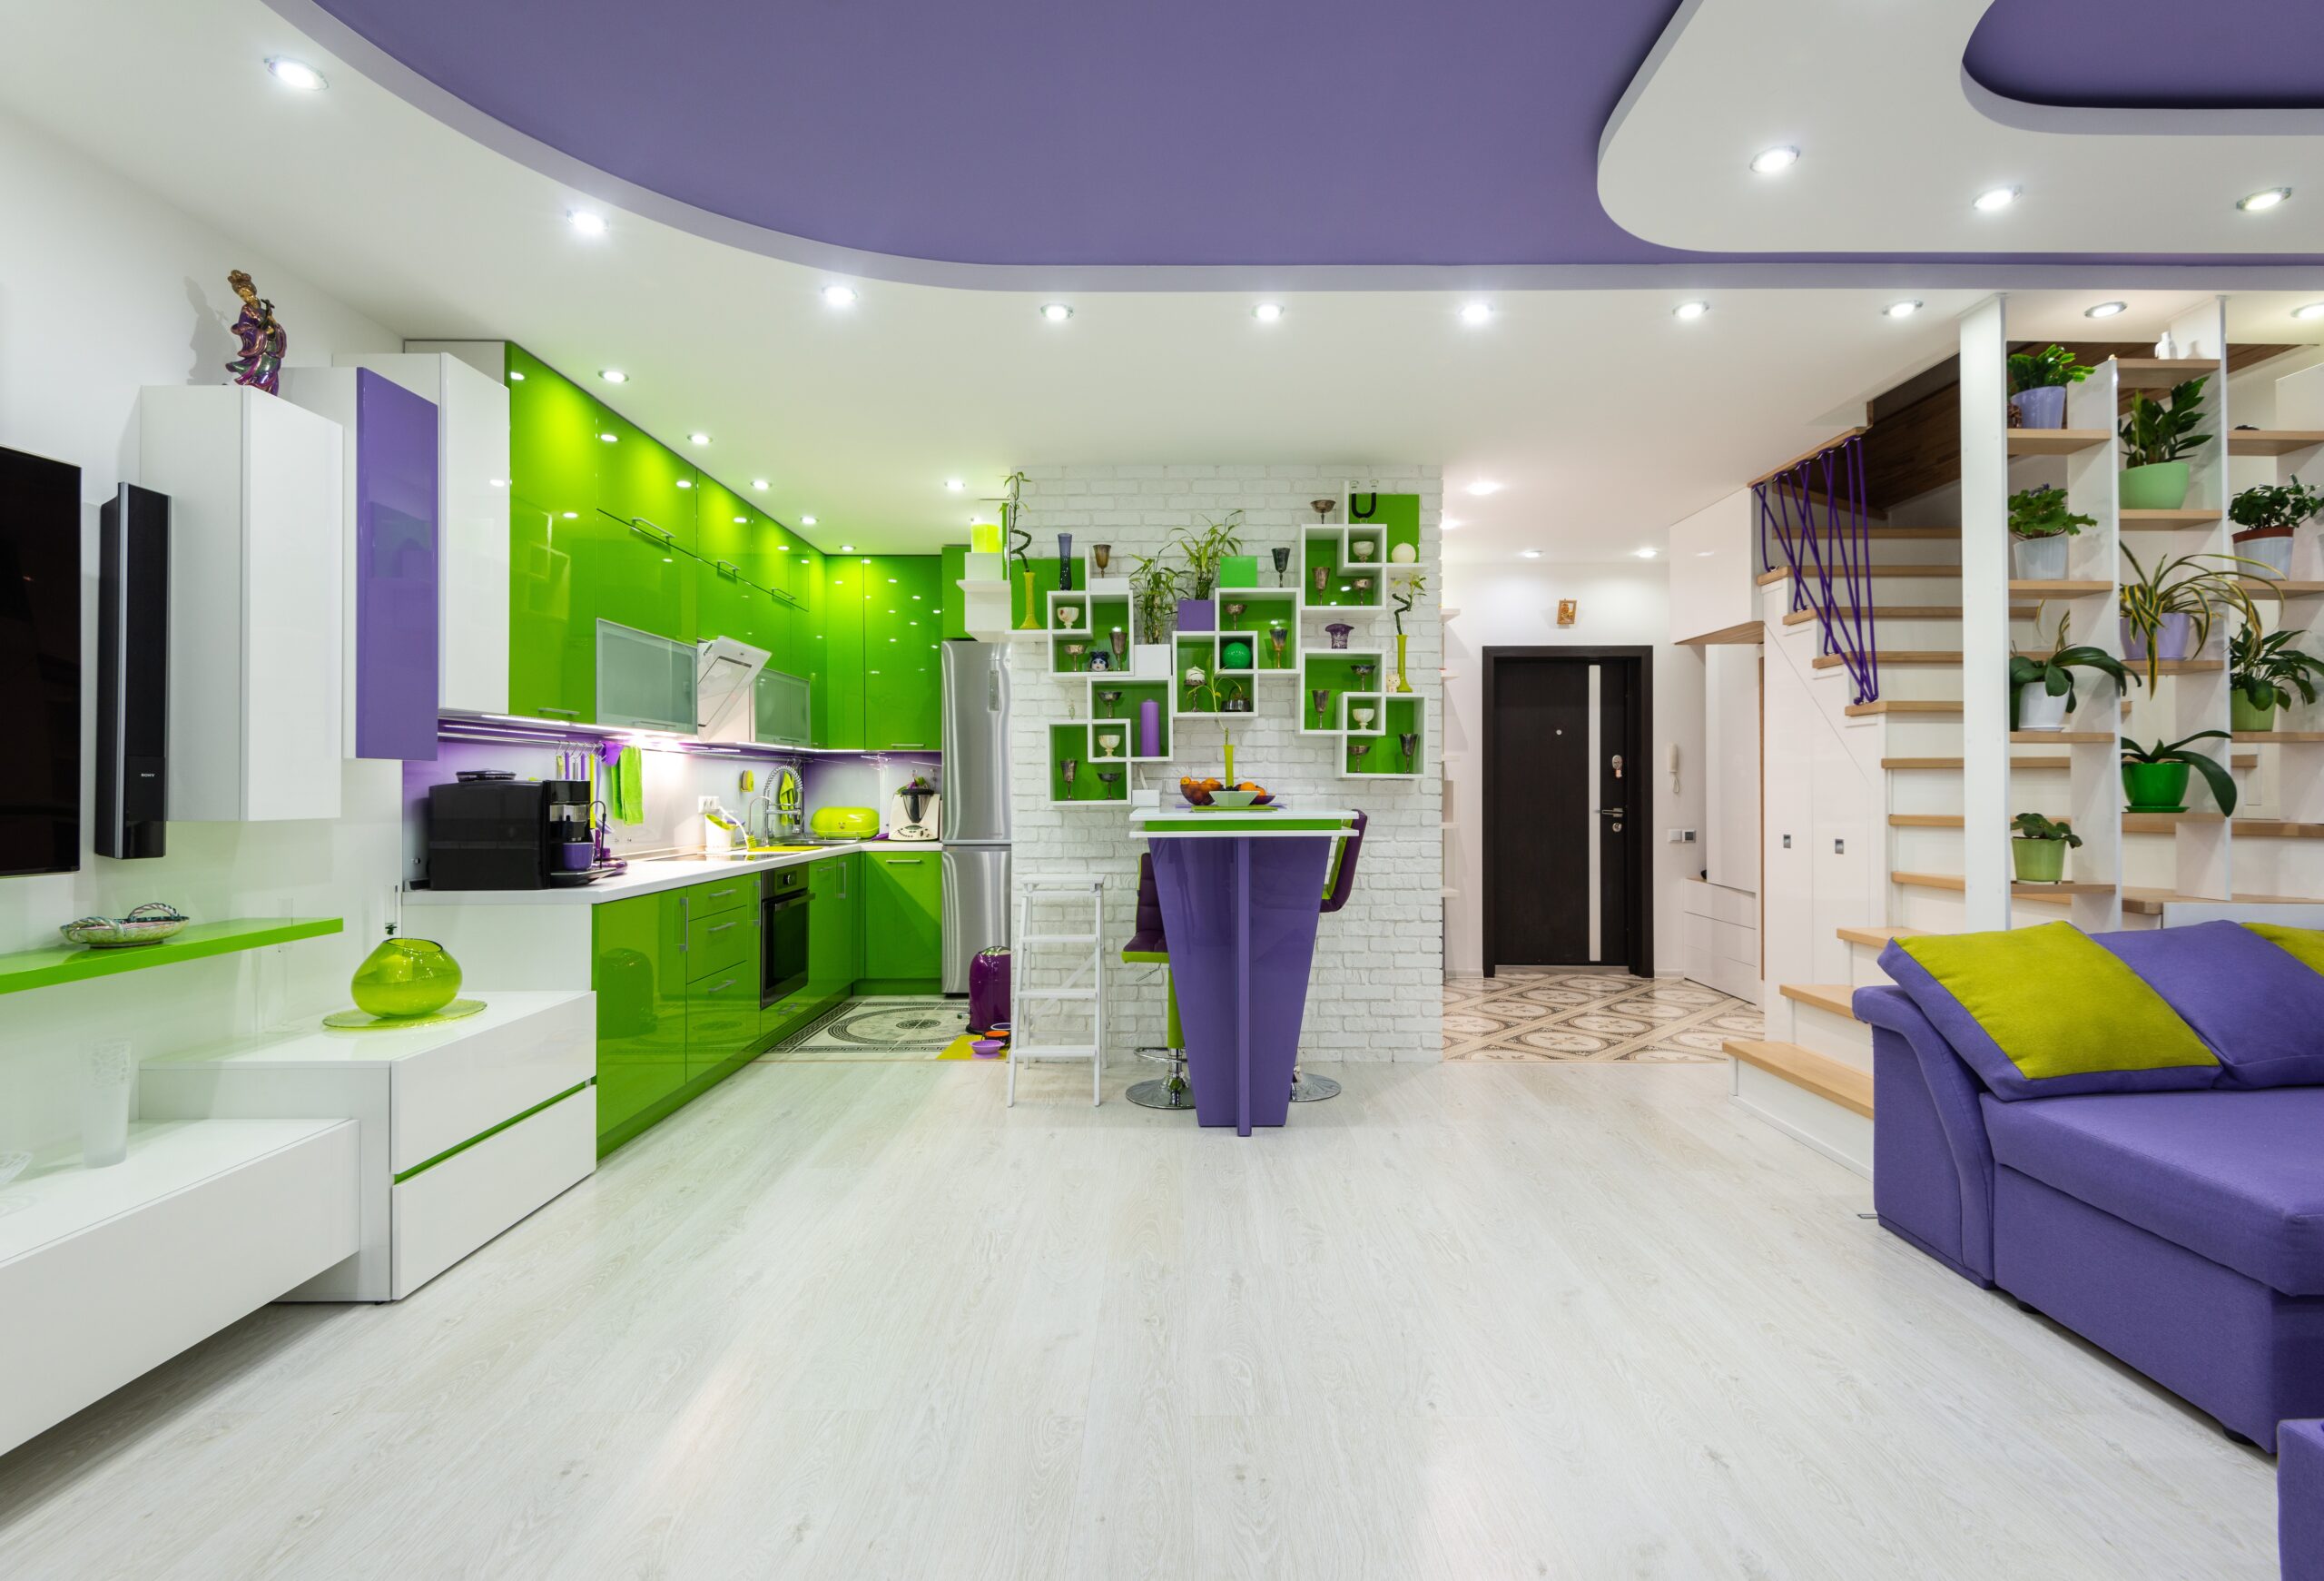 A purple and green room for color schemes that go with green. Pictured: A room.